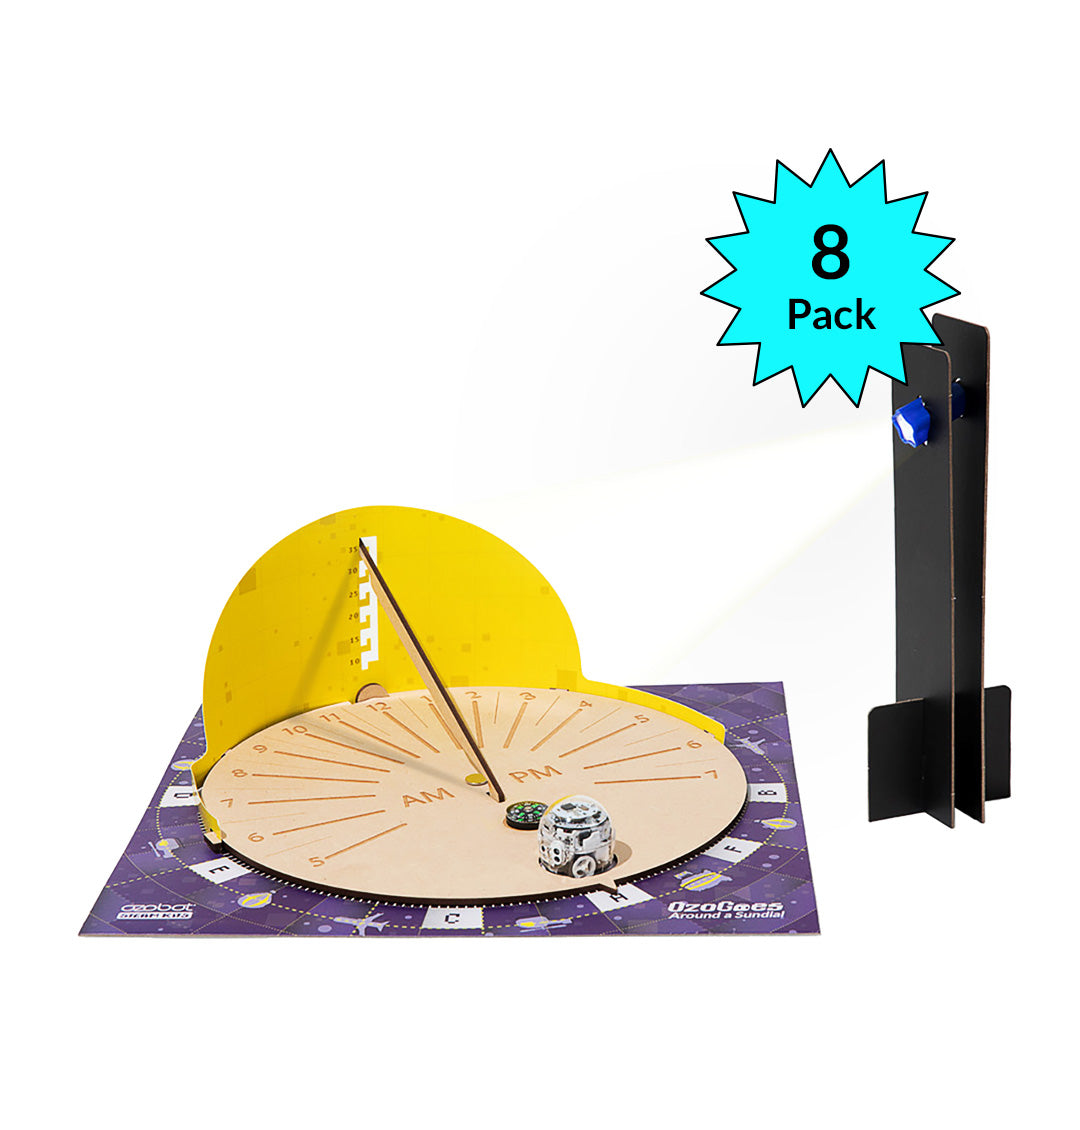 Ozogoes around a sundial STEAM kit by Ozobot - best stem learning kits for kids